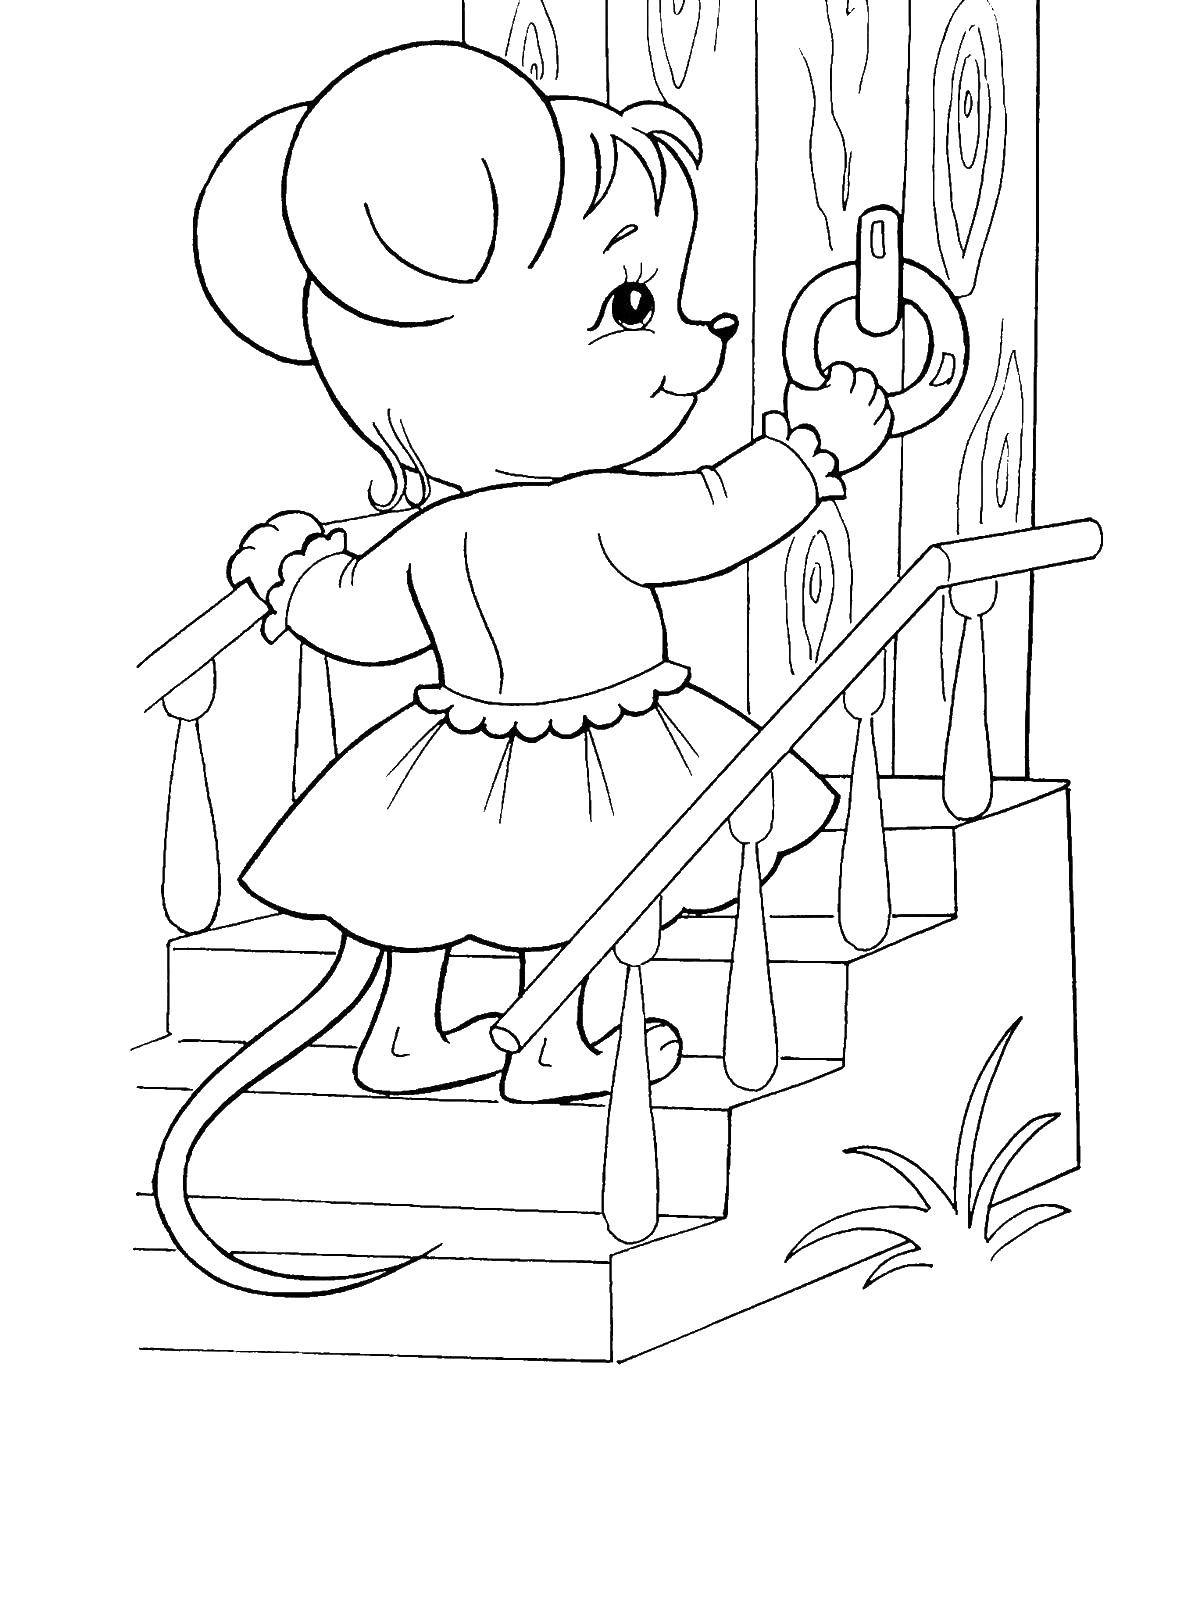 Coloring Mouse opens the door. Category Fairy tales. Tags:  mouse.